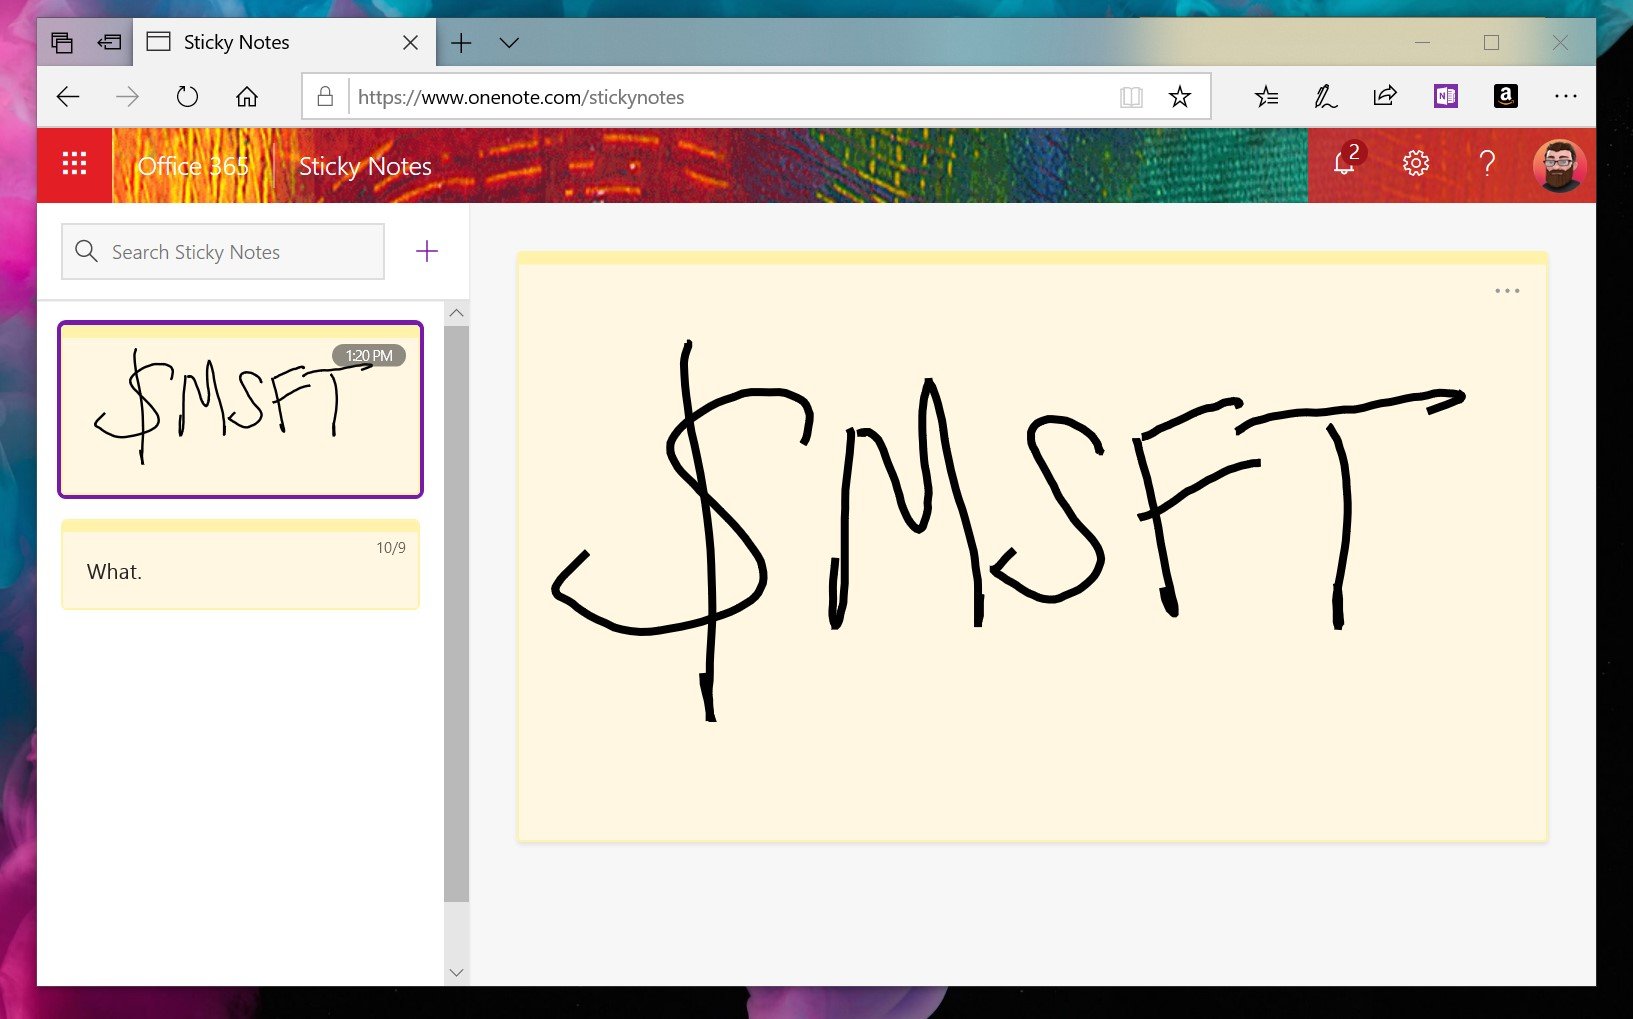 Microsoft brings Sticky Notes to the web